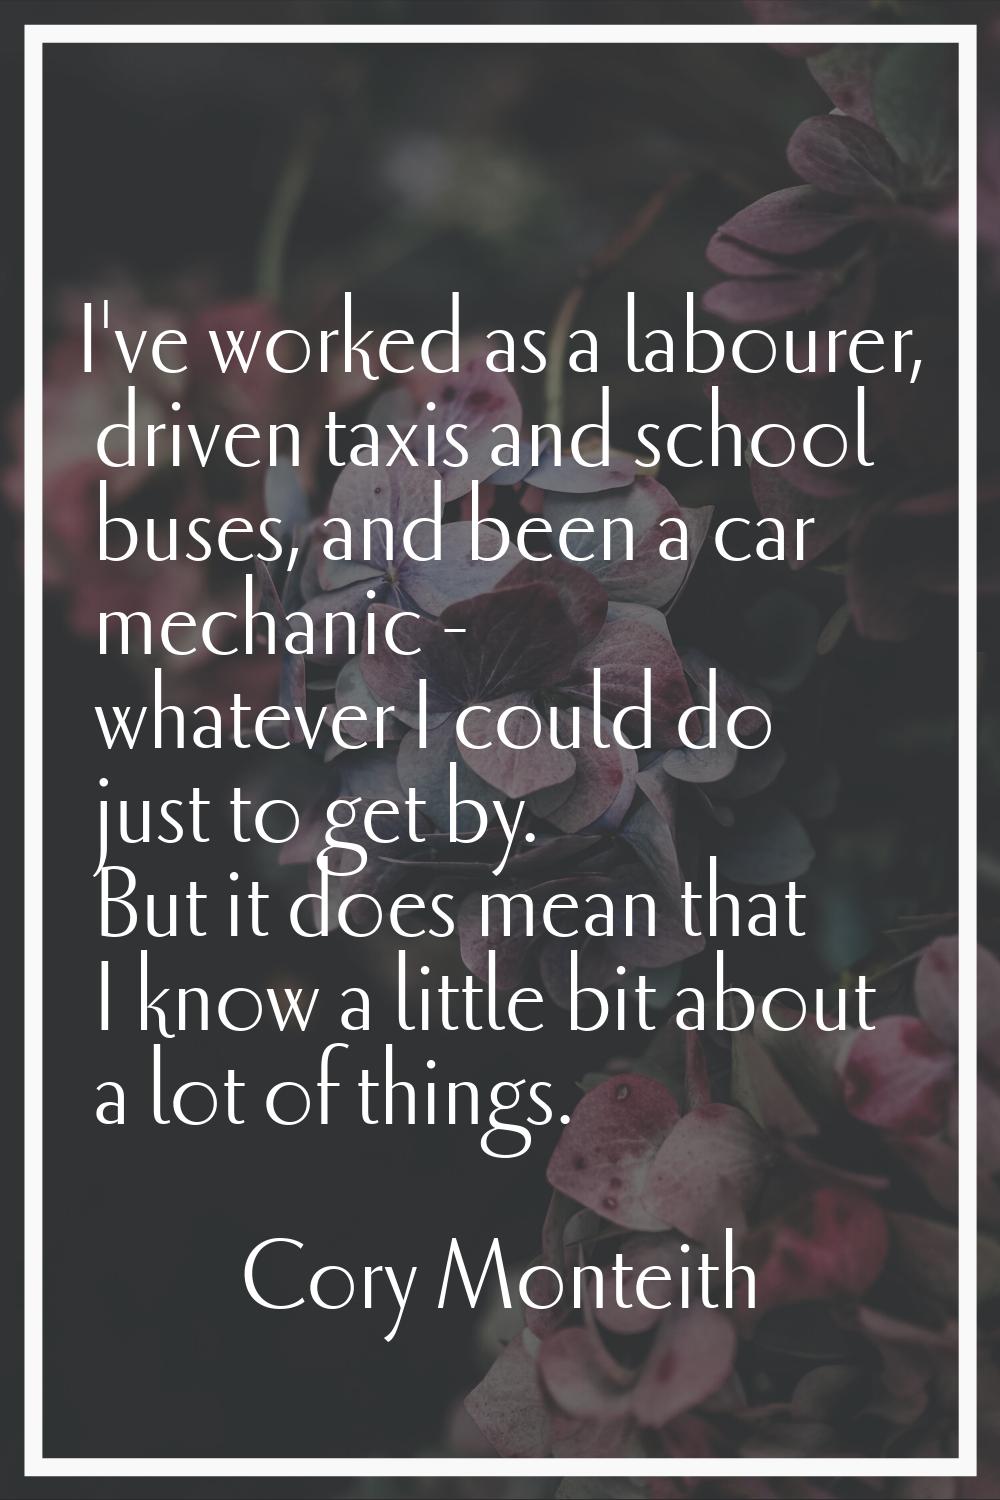 I've worked as a labourer, driven taxis and school buses, and been a car mechanic - whatever I coul